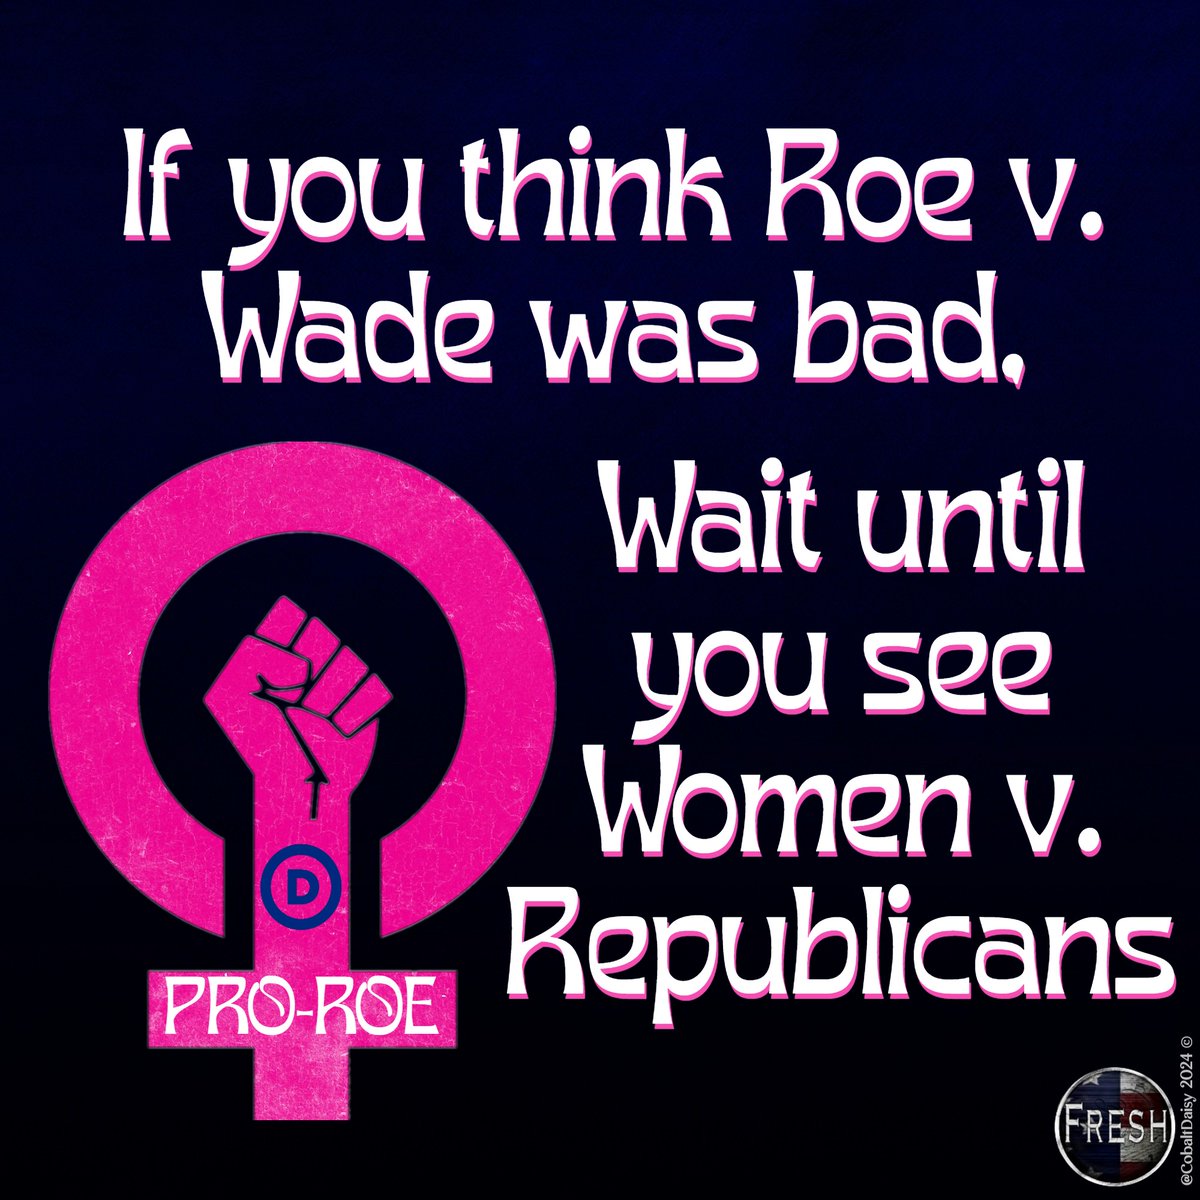 Rick, as well as all the other Republicans are going to find out exactly how important women feel about their rights to make decisions about their own bodies in November #RoevemberIsComing #Fresh